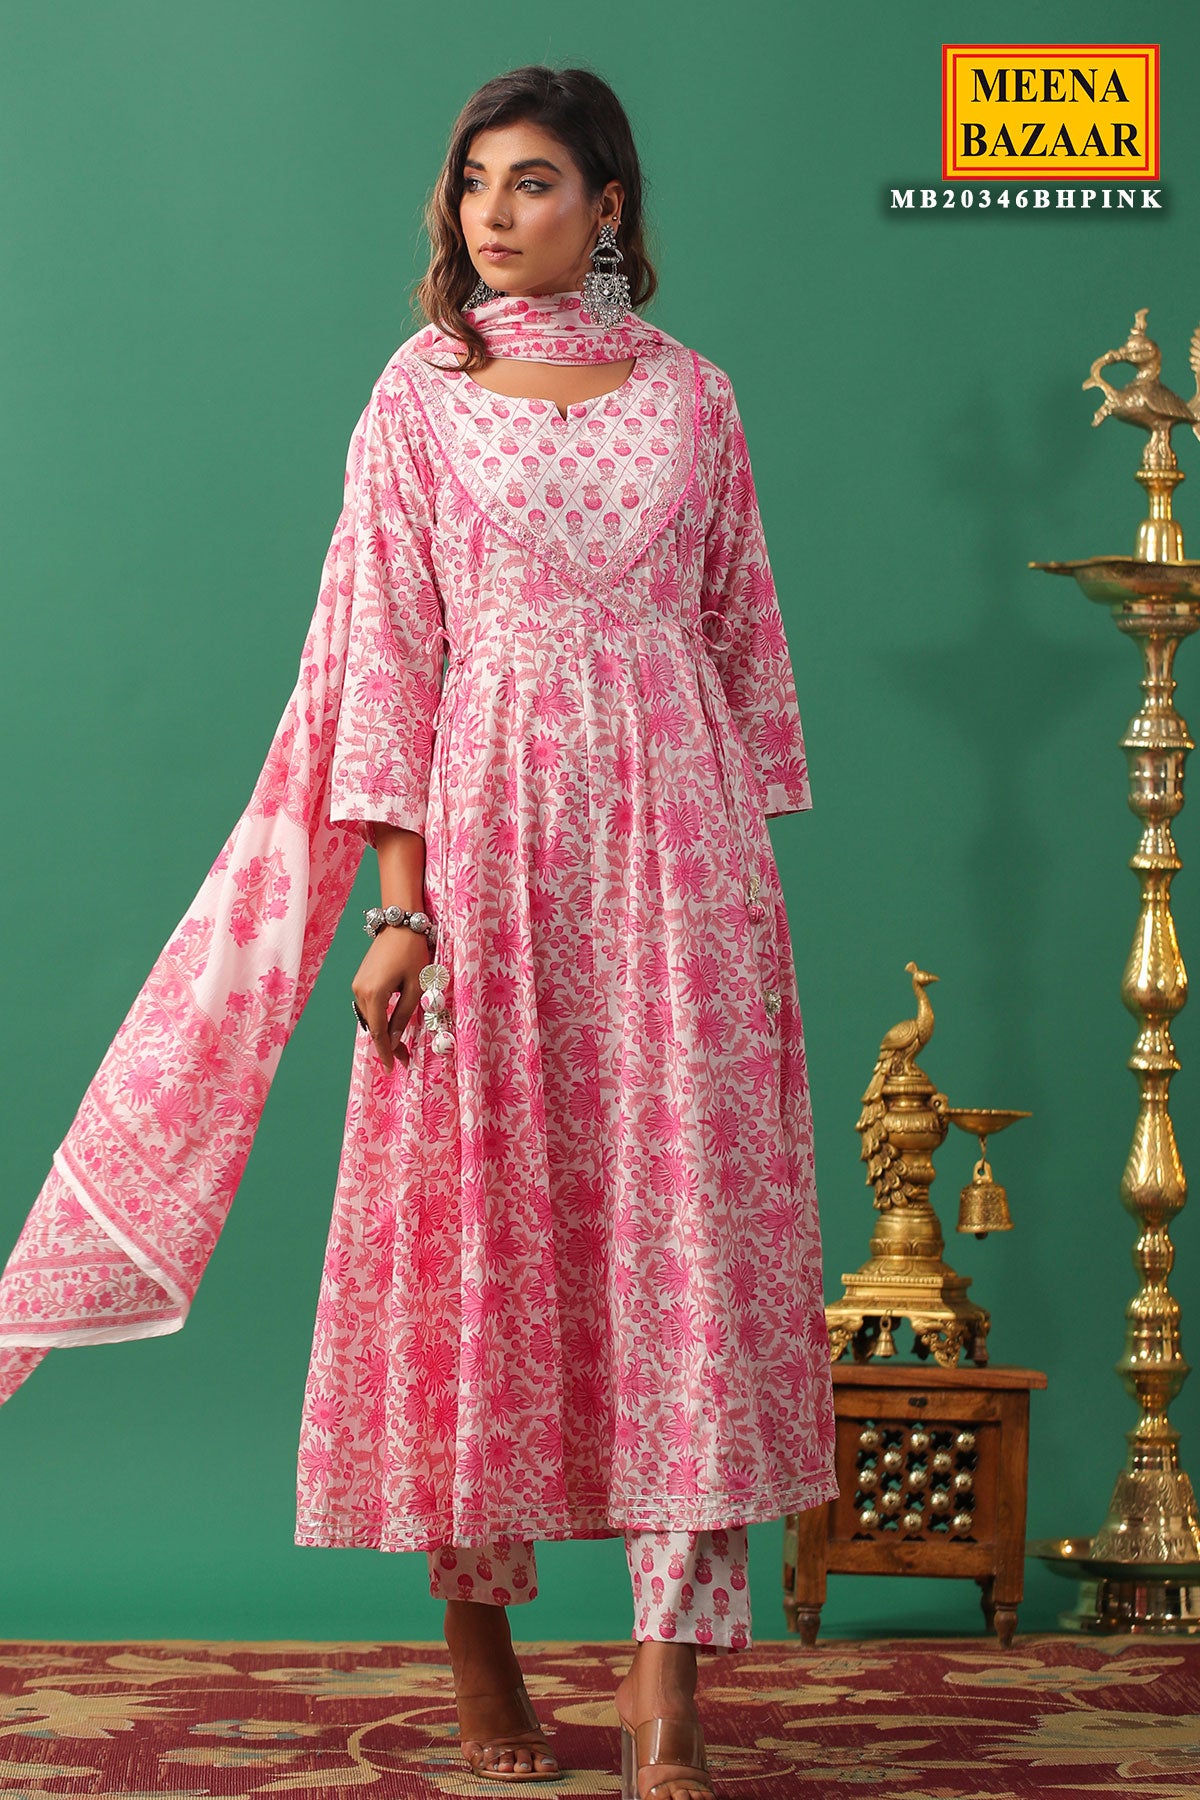 Pink Cotton Floral Printed Thread and Zari Embroidered Suit